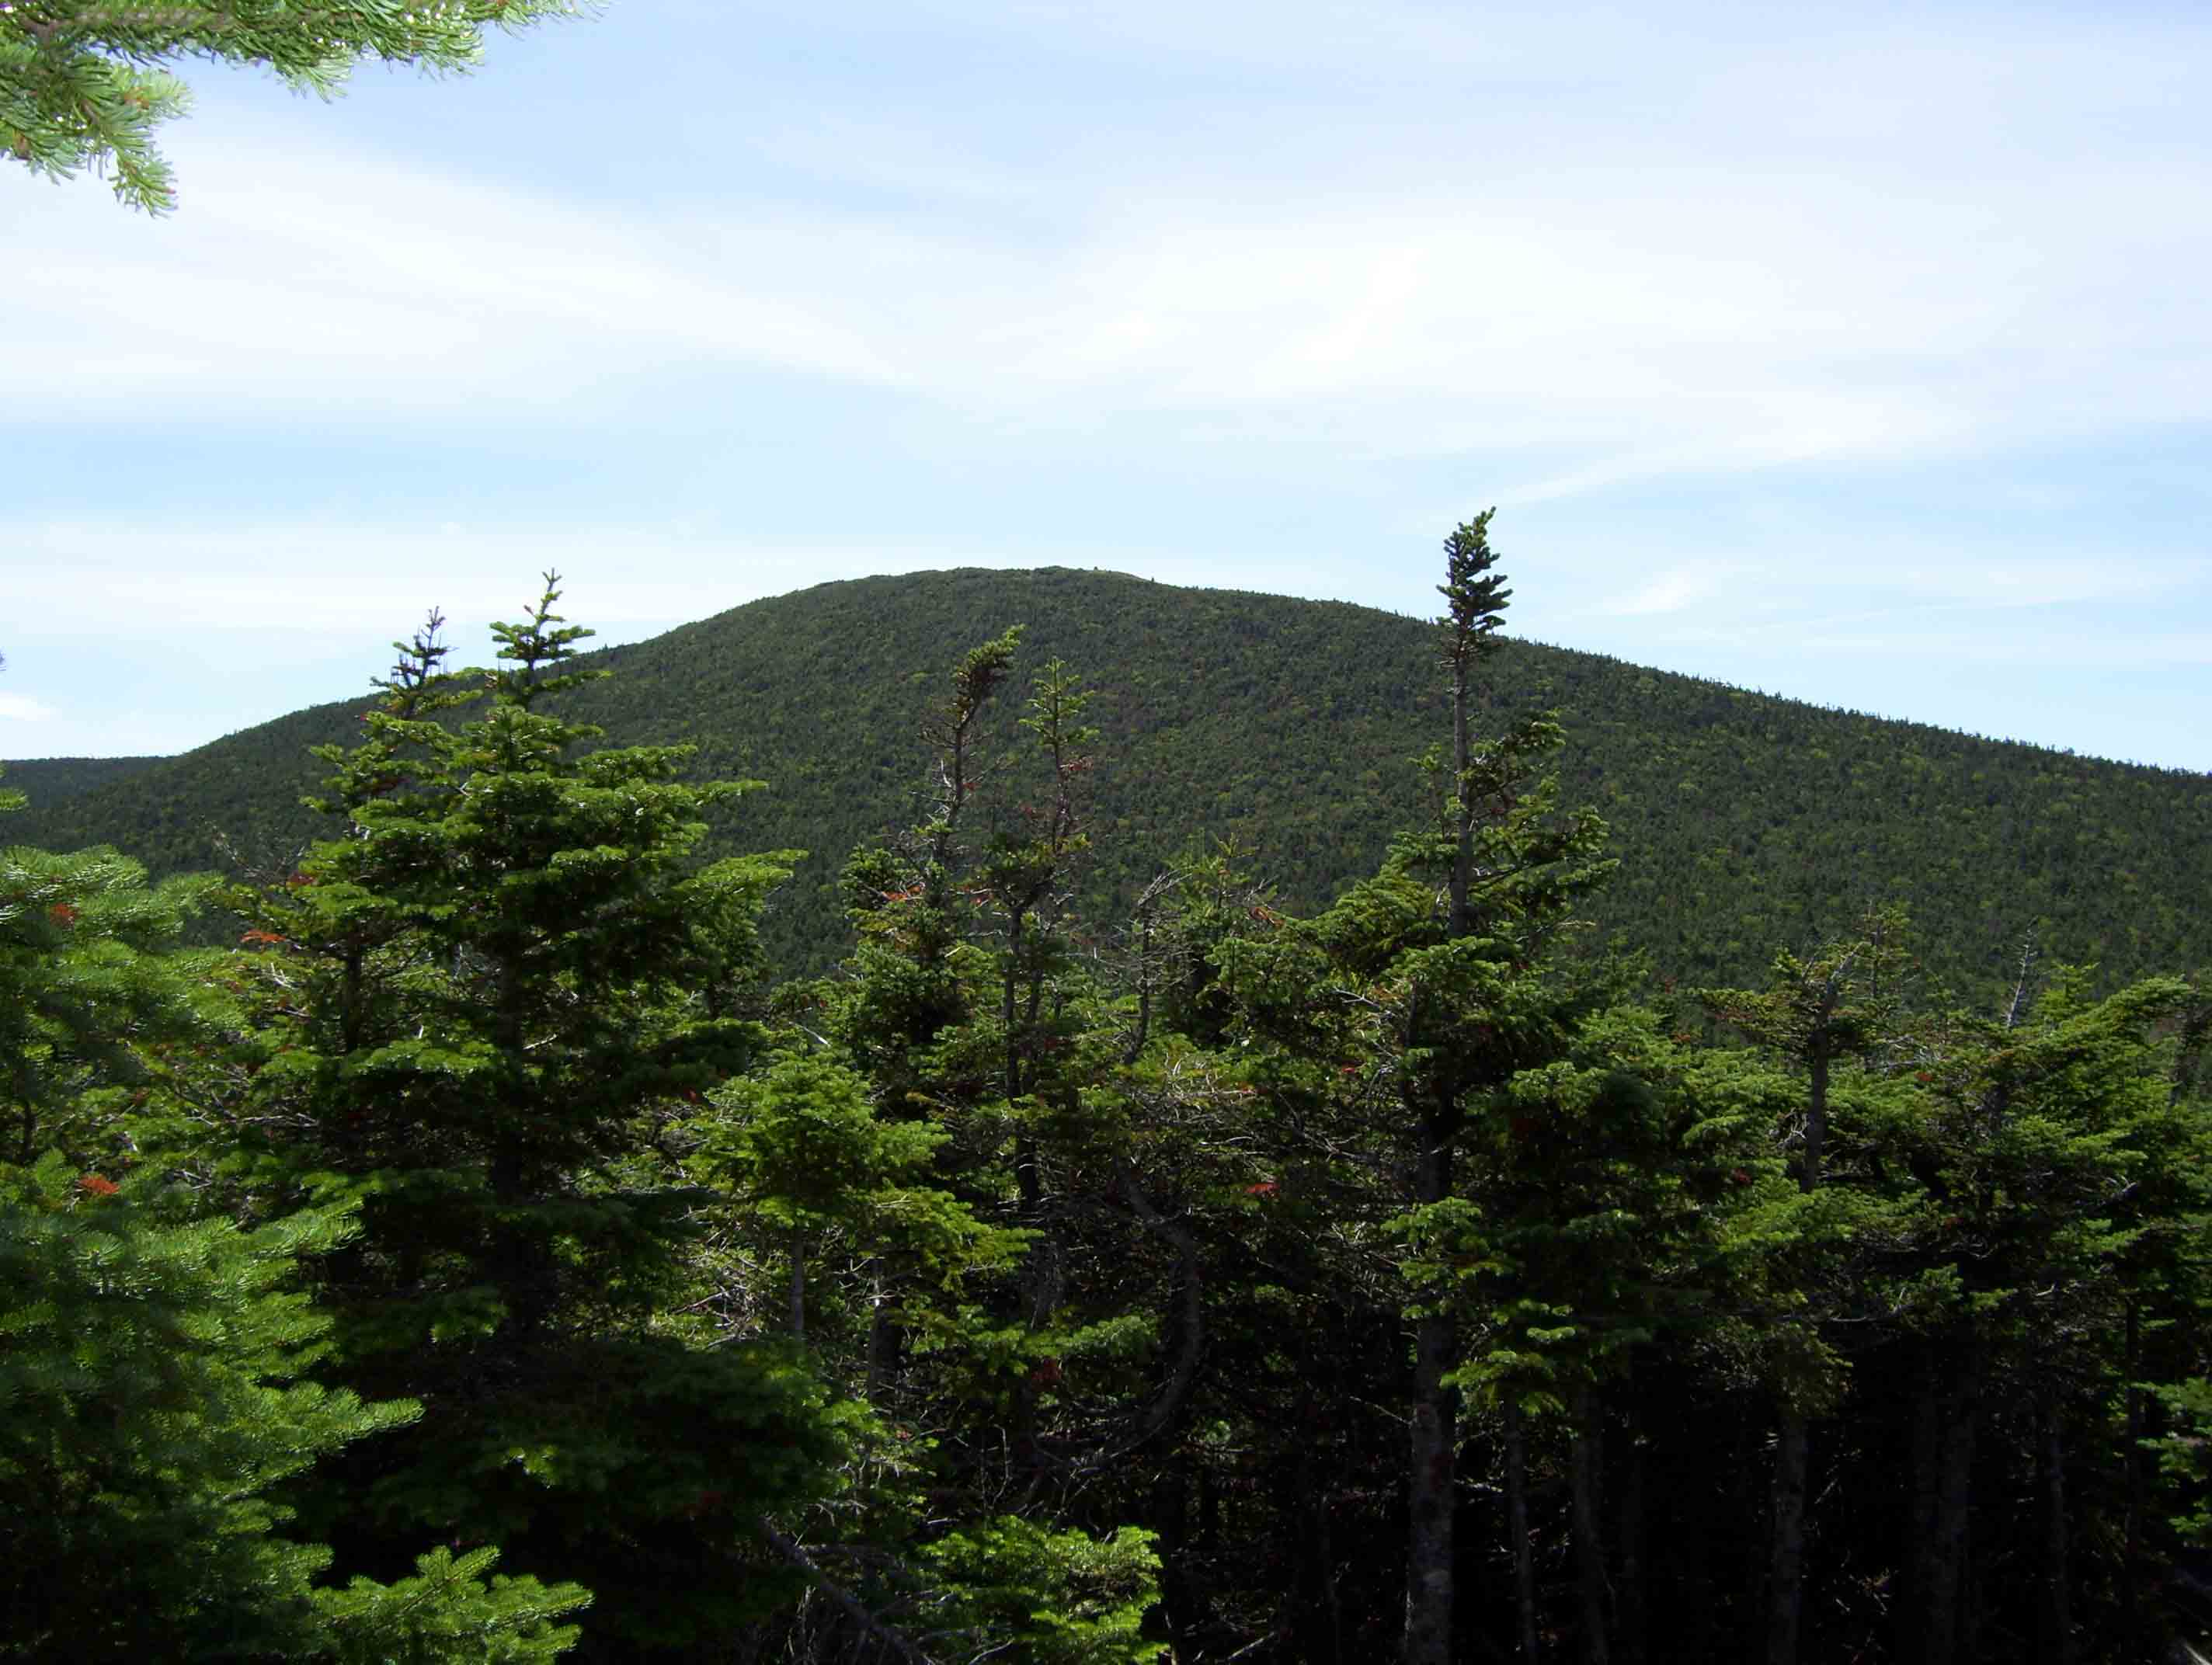 The summit of Mt. Moosilauke as seen from near Mt. Blue on the Beaverbrook Trail section of the AT. Taken from approx. Mile 2.8.  Courtesy dlcul@conncoll.edu